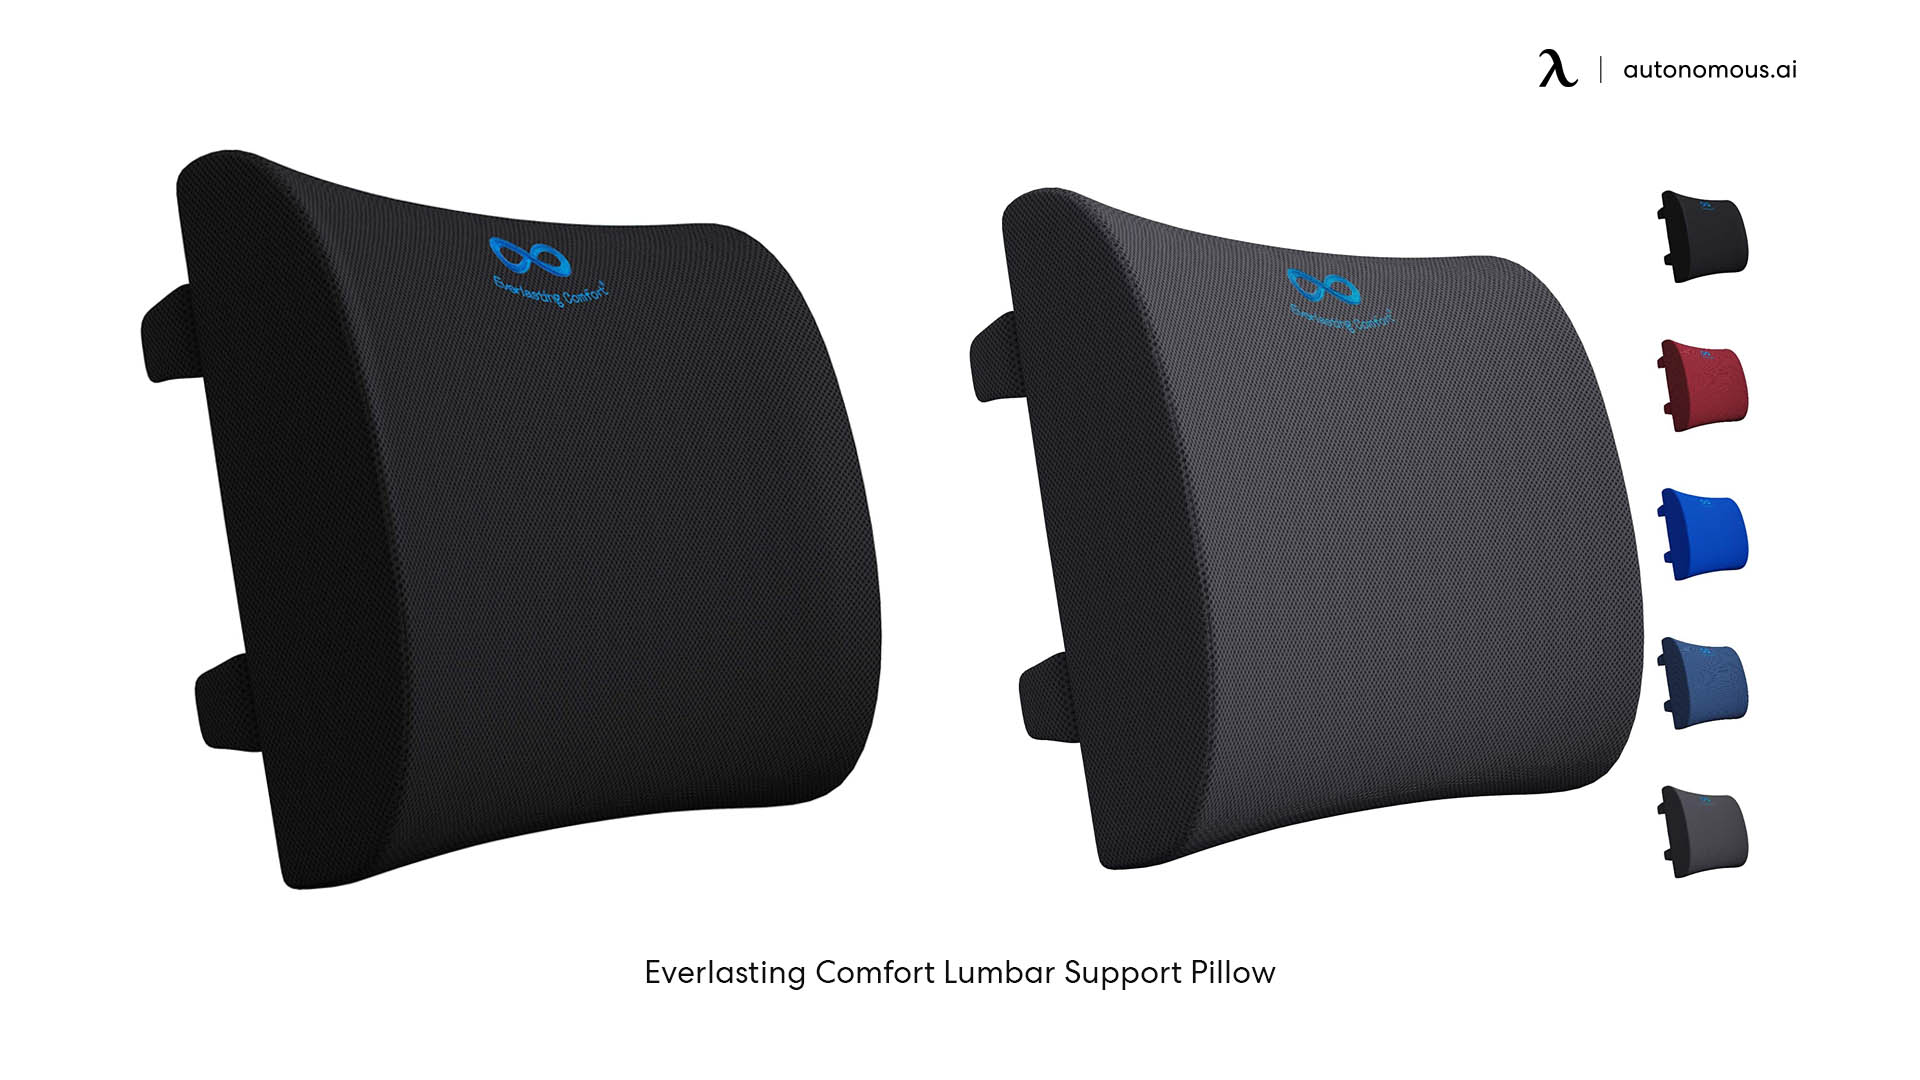 Everlasting Comfort lumbar support for office chair